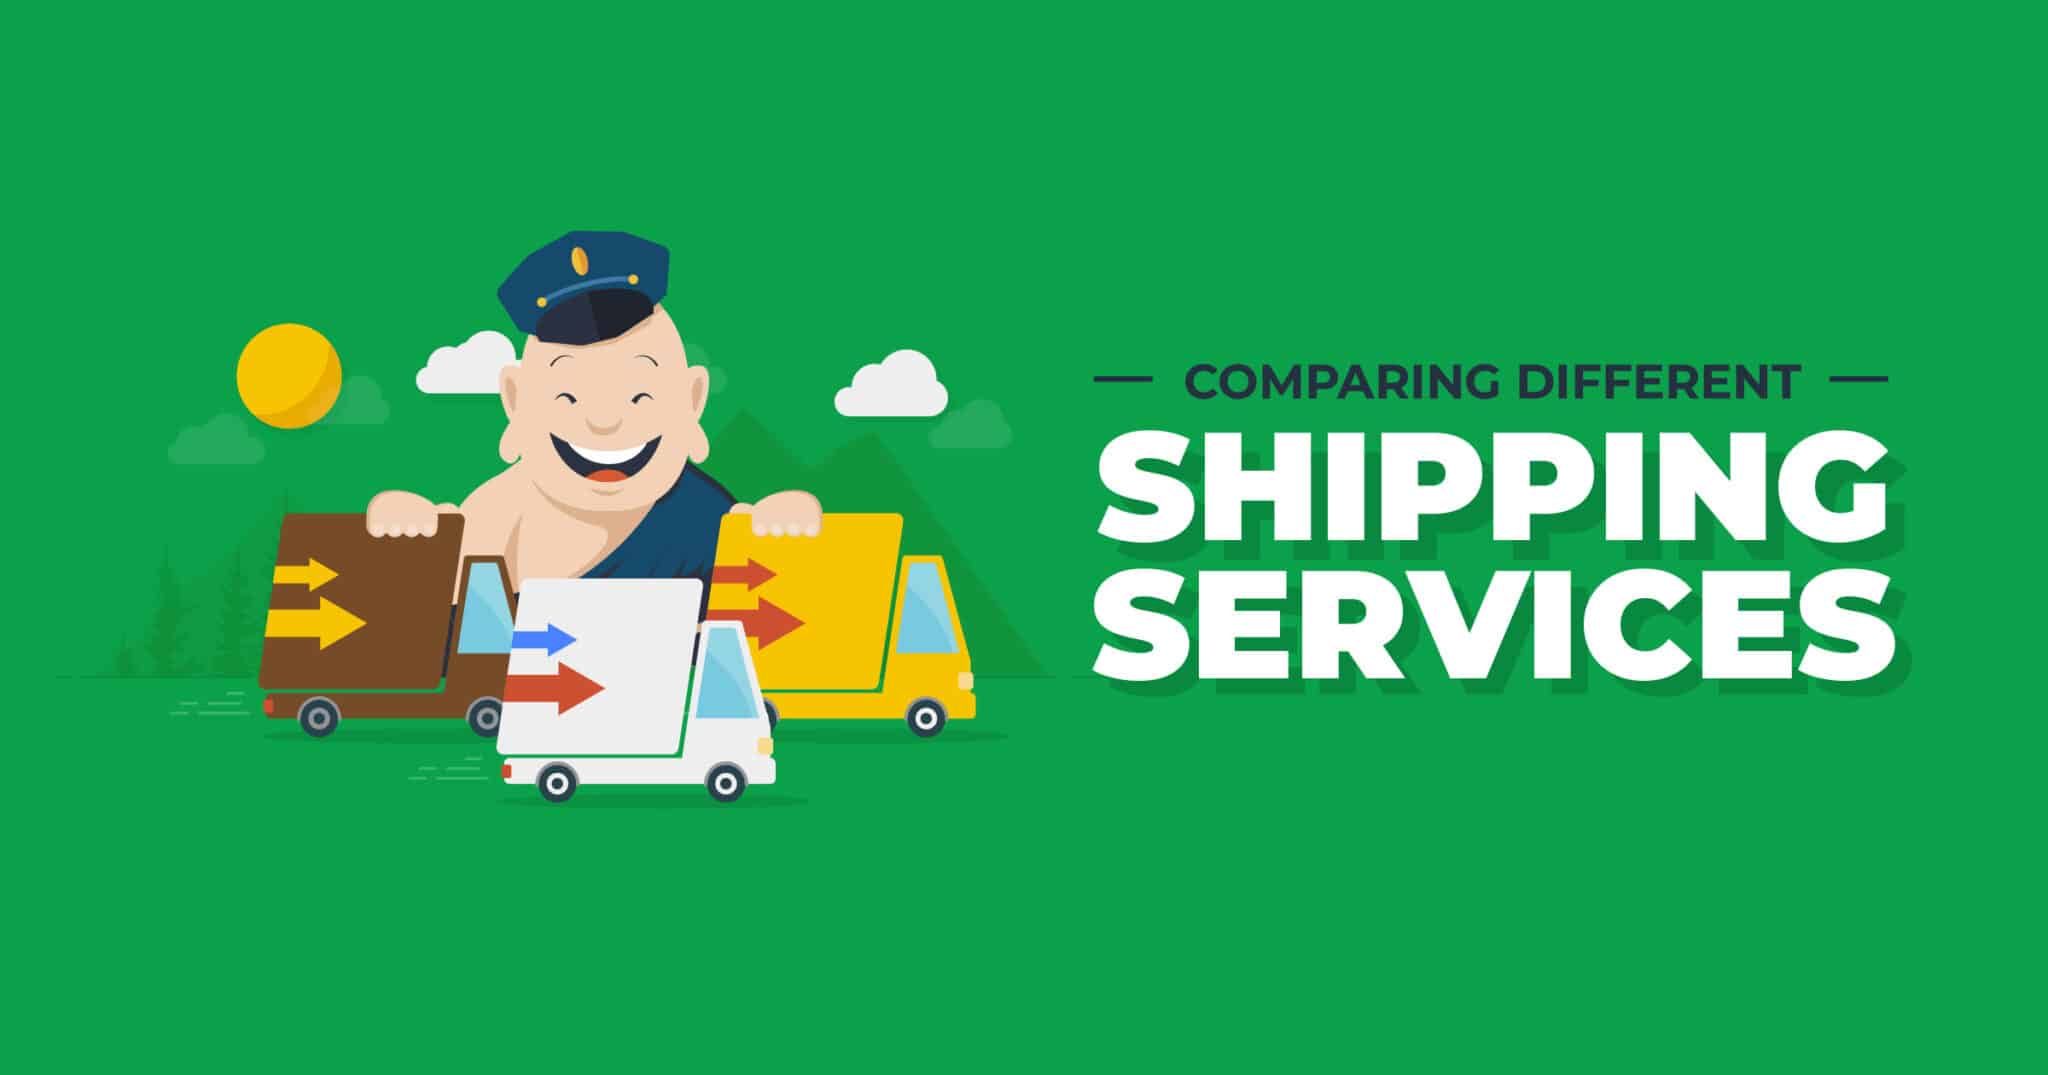 Comparing Different Shipping Services